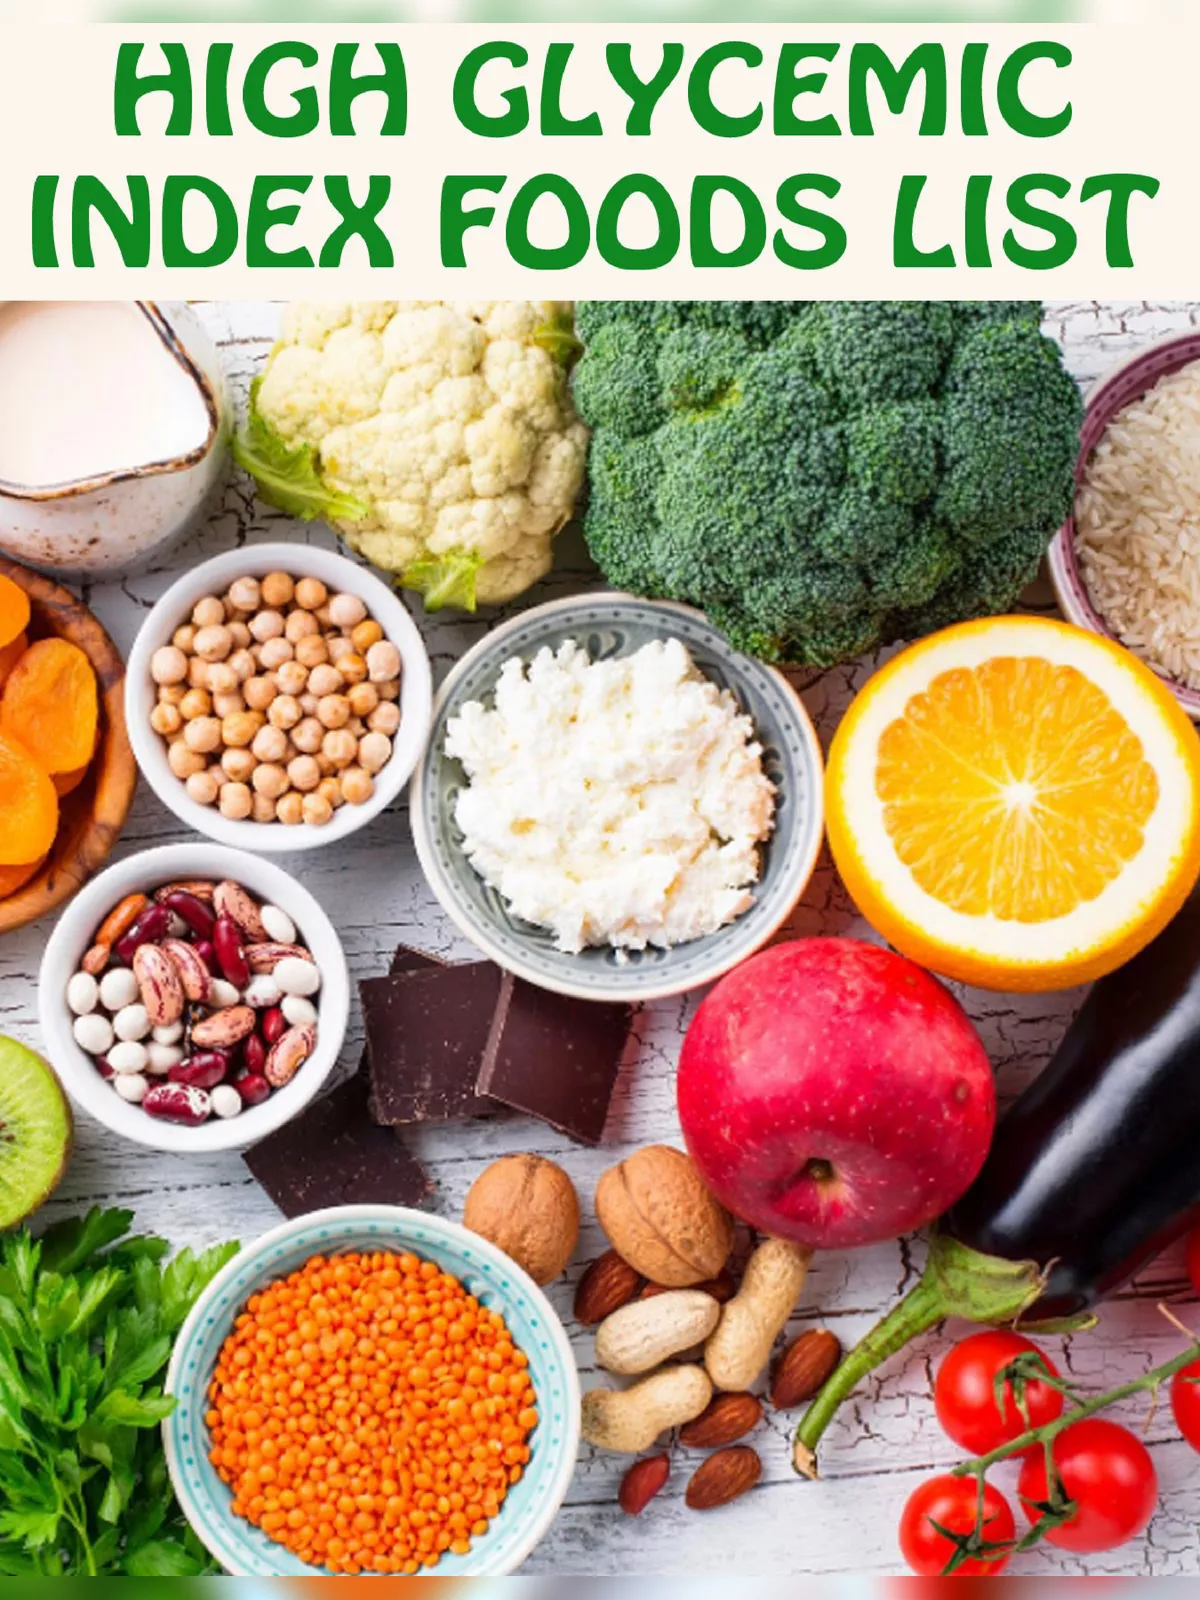 High Glycemic Index Foods List